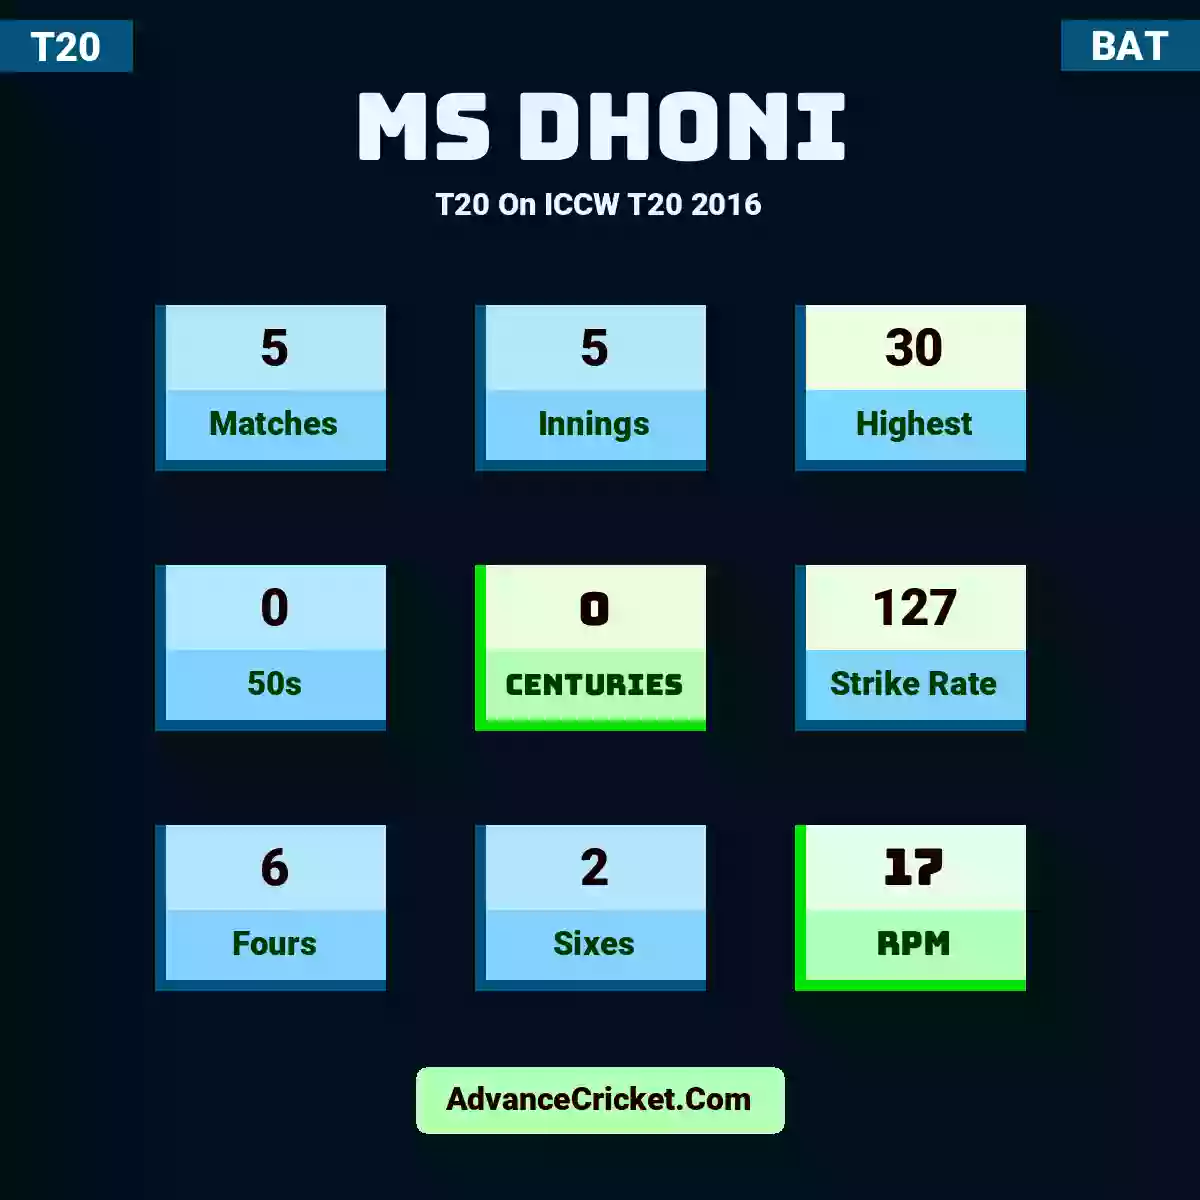 MS Dhoni T20  On ICCW T20 2016, MS Dhoni played 5 matches, scored 30 runs as highest, 0 half-centuries, and 0 centuries, with a strike rate of 127. M.Dhoni hit 6 fours and 2 sixes, with an RPM of 17.